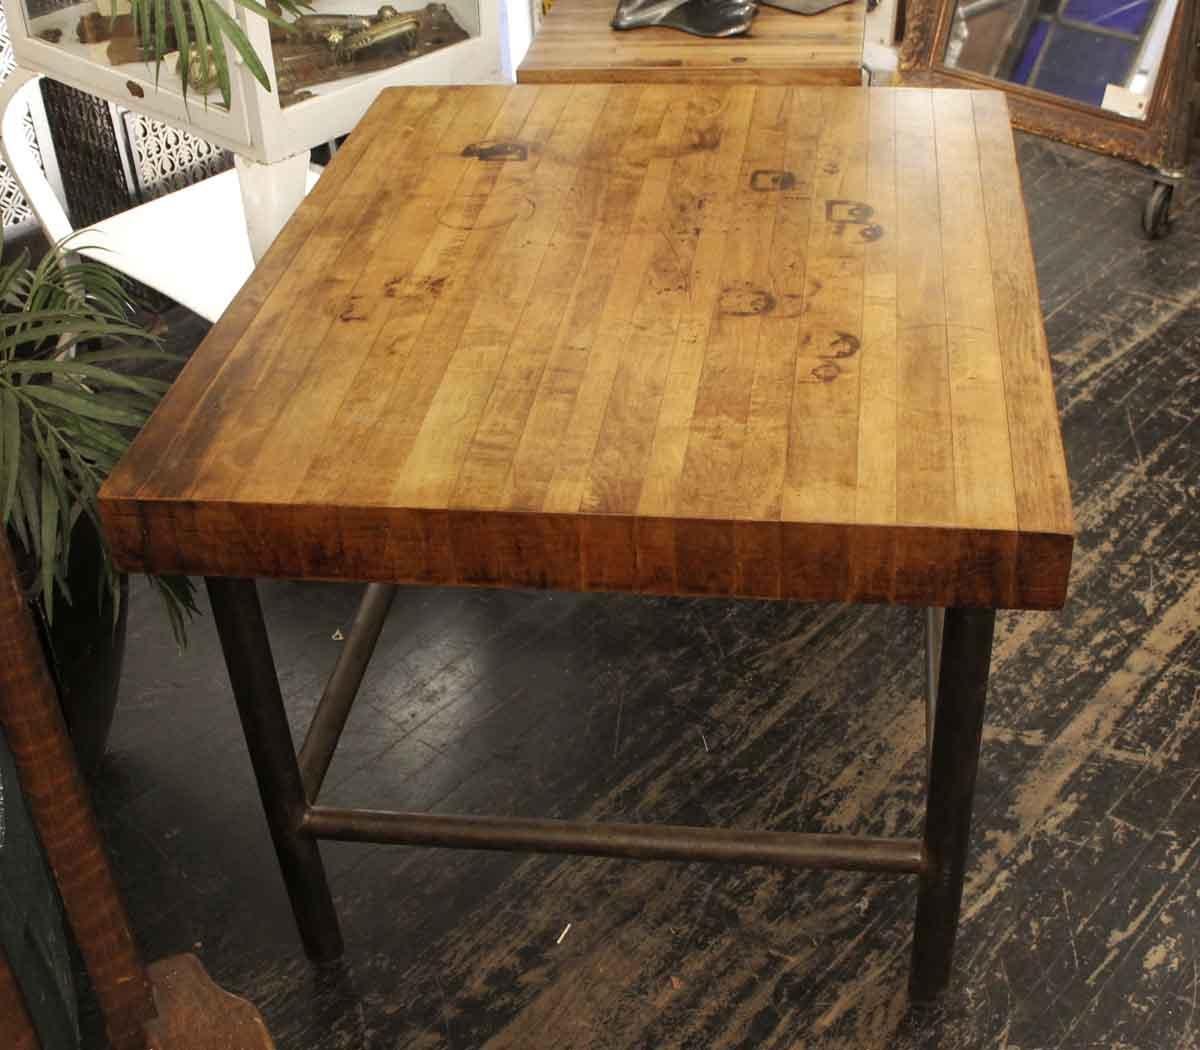 1990s Butcher Block Table with Black Pipe Legs (amerikanisch)